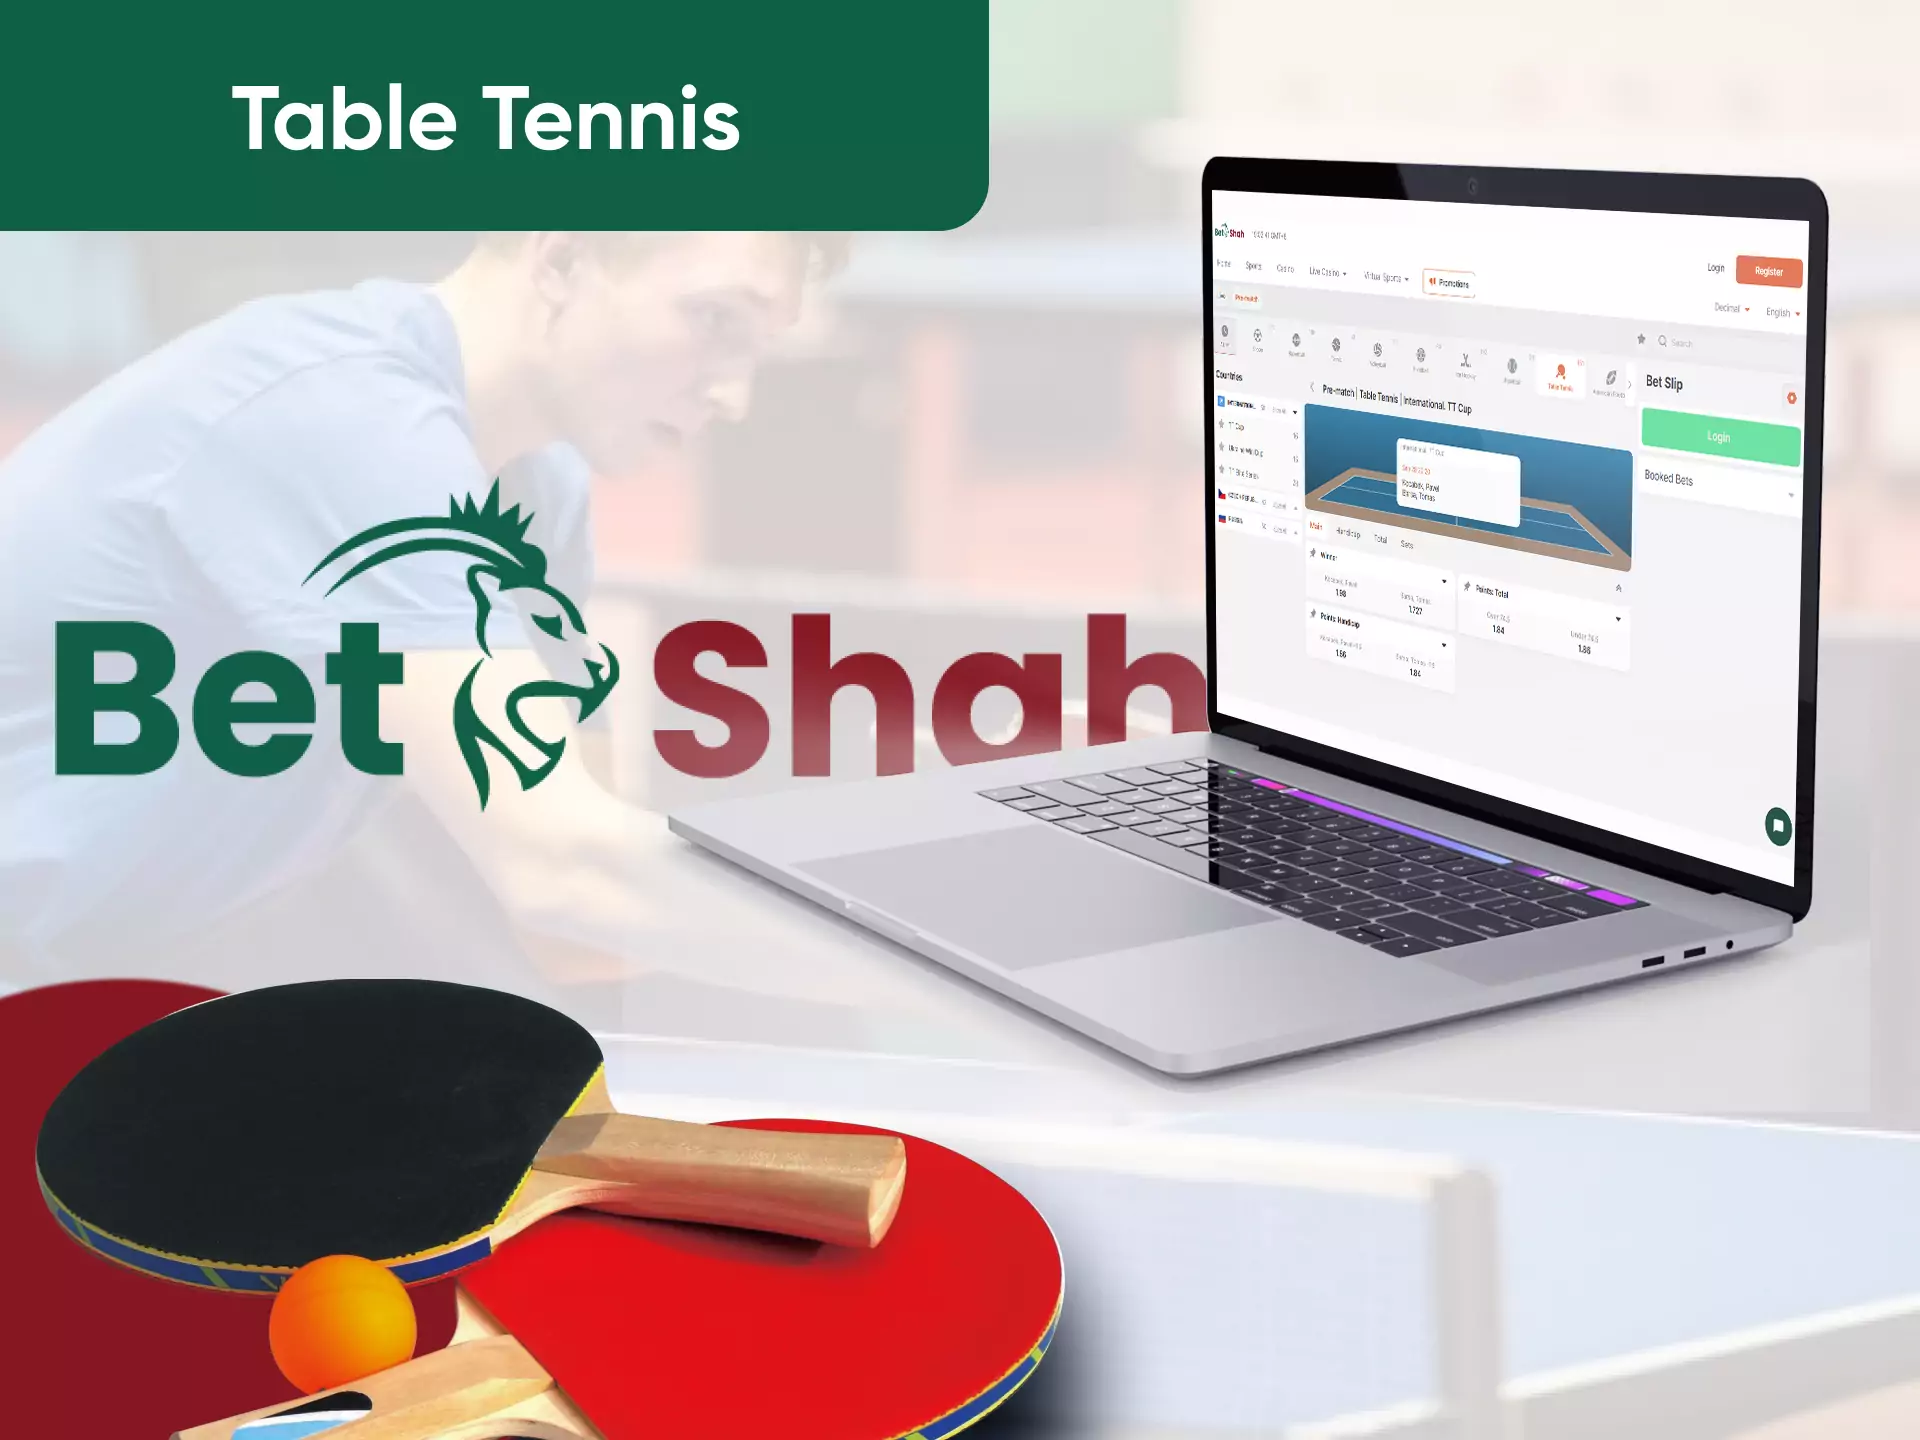 On Betshah, you can place bets on table tennis events.